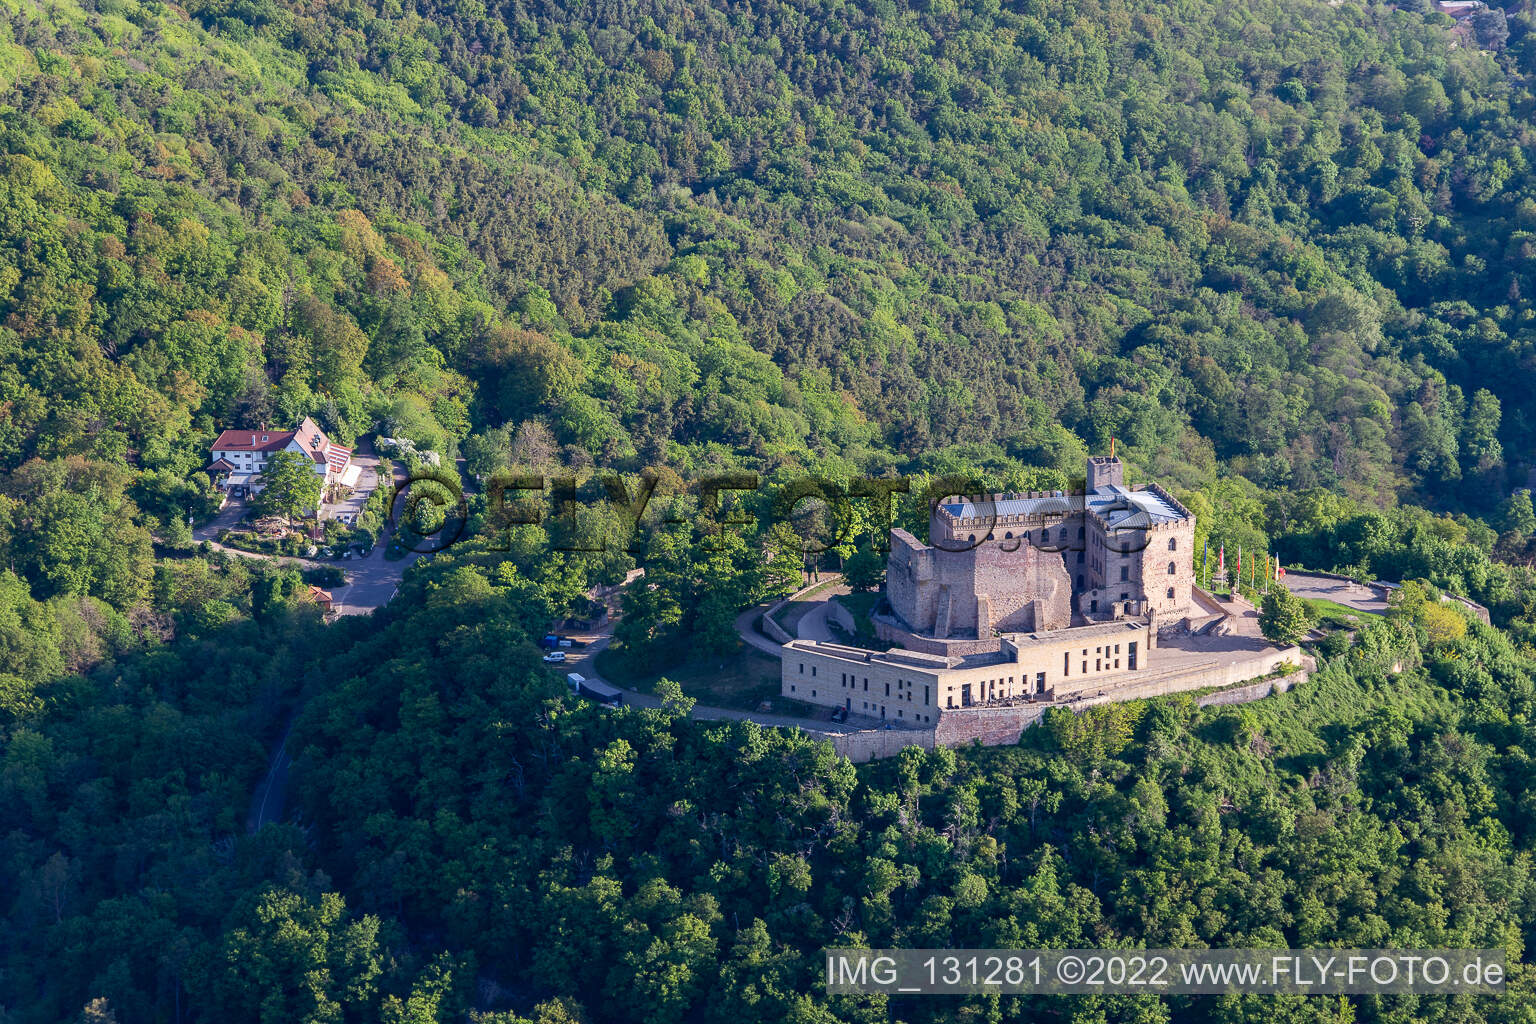 Hambach Castle in the district Diedesfeld in Neustadt an der Weinstraße in the state Rhineland-Palatinate, Germany from the drone perspective